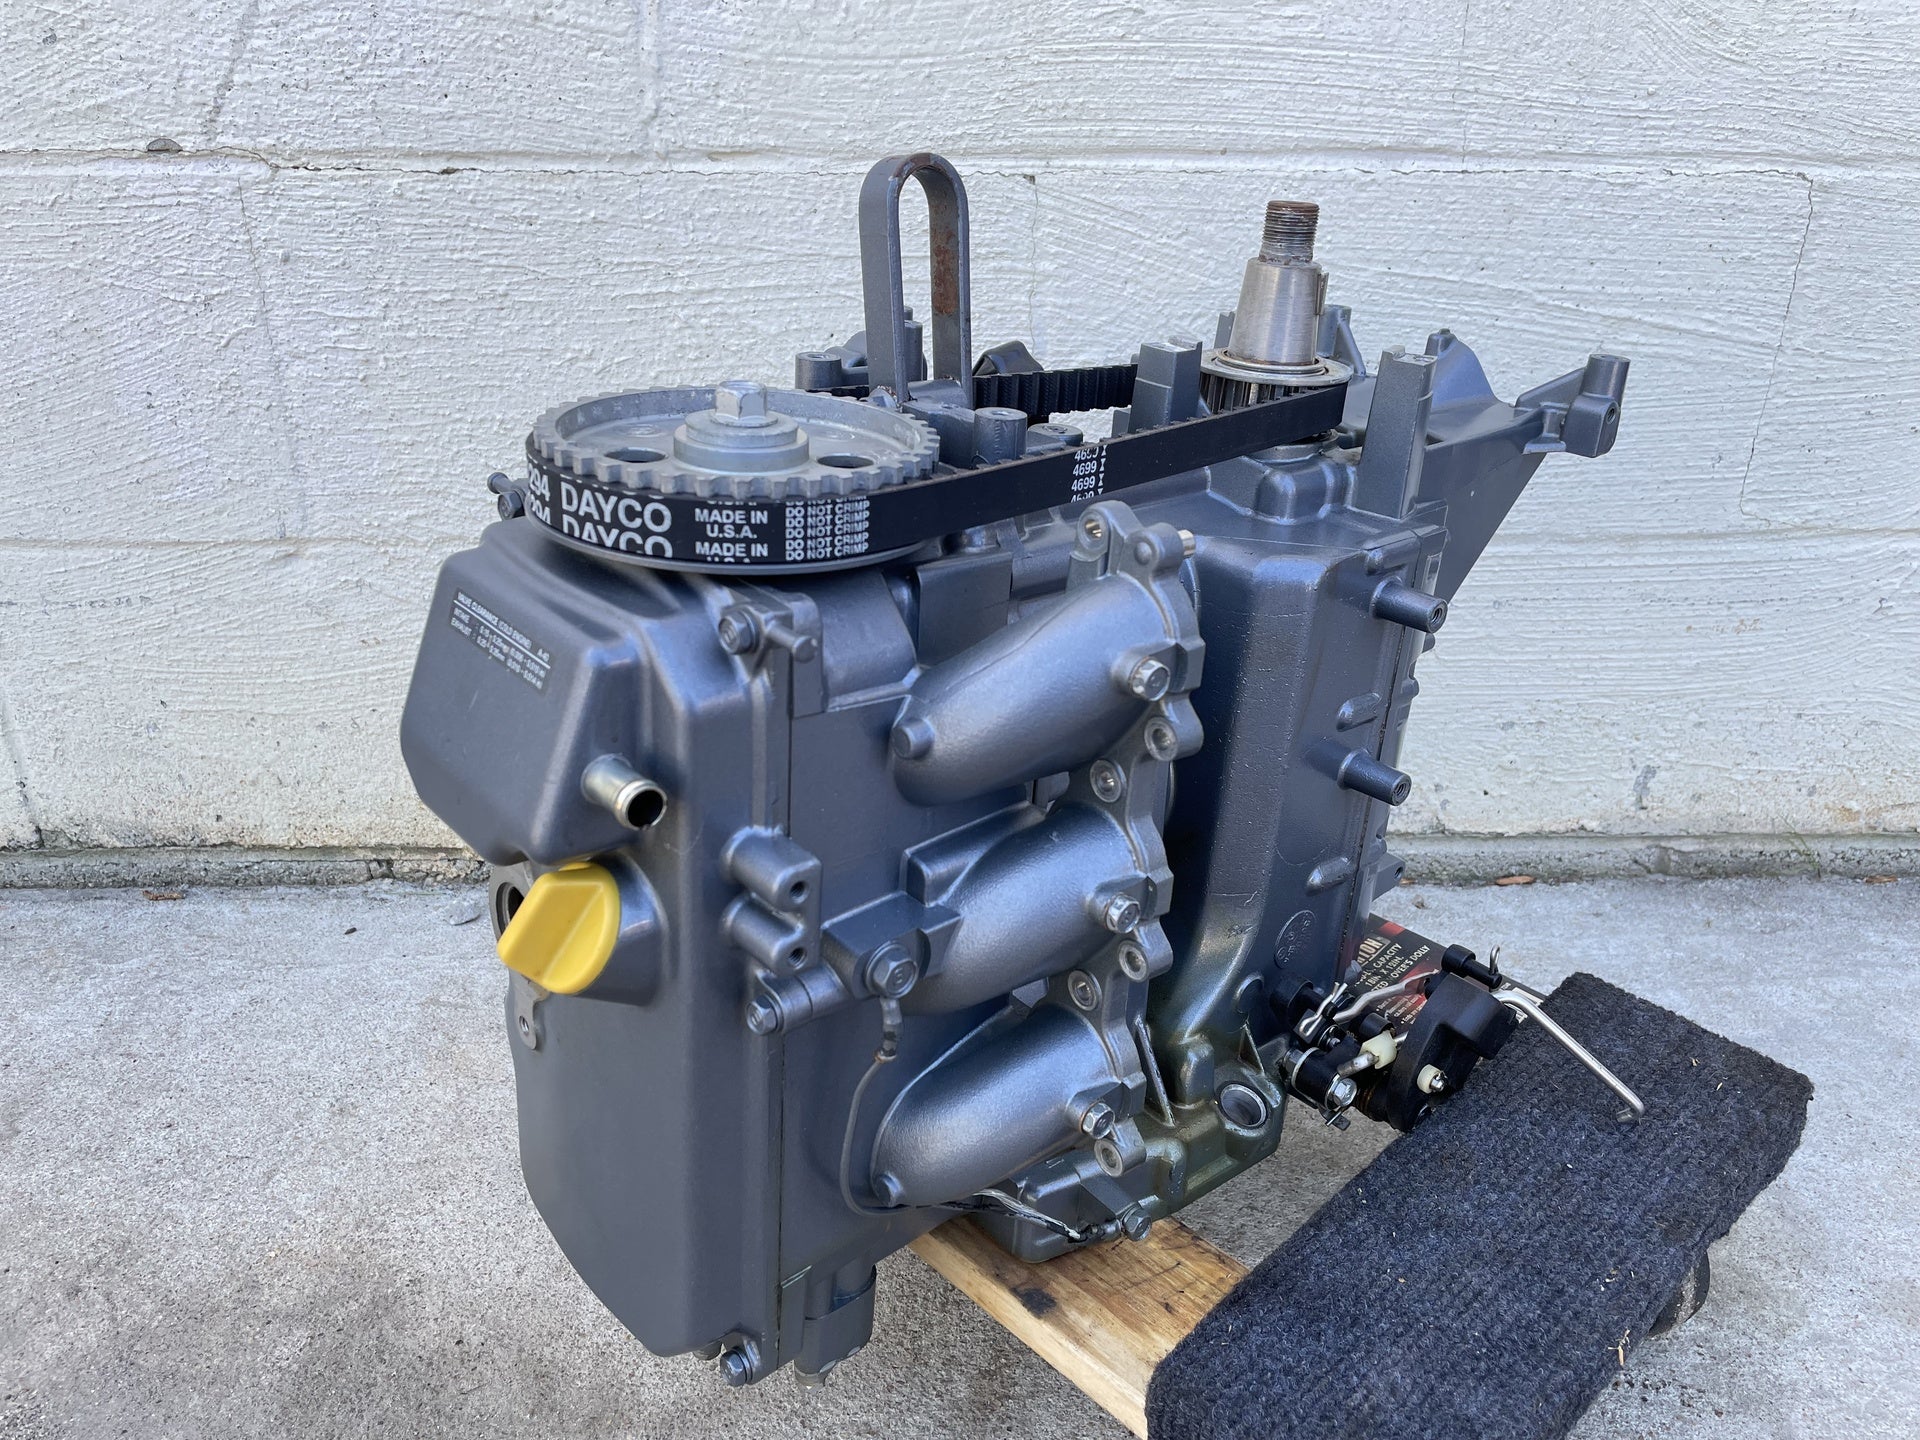 2001 Yamaha 30HP 4 Stroke Outboard Powerhead Assembly Crankcase - Good Compression